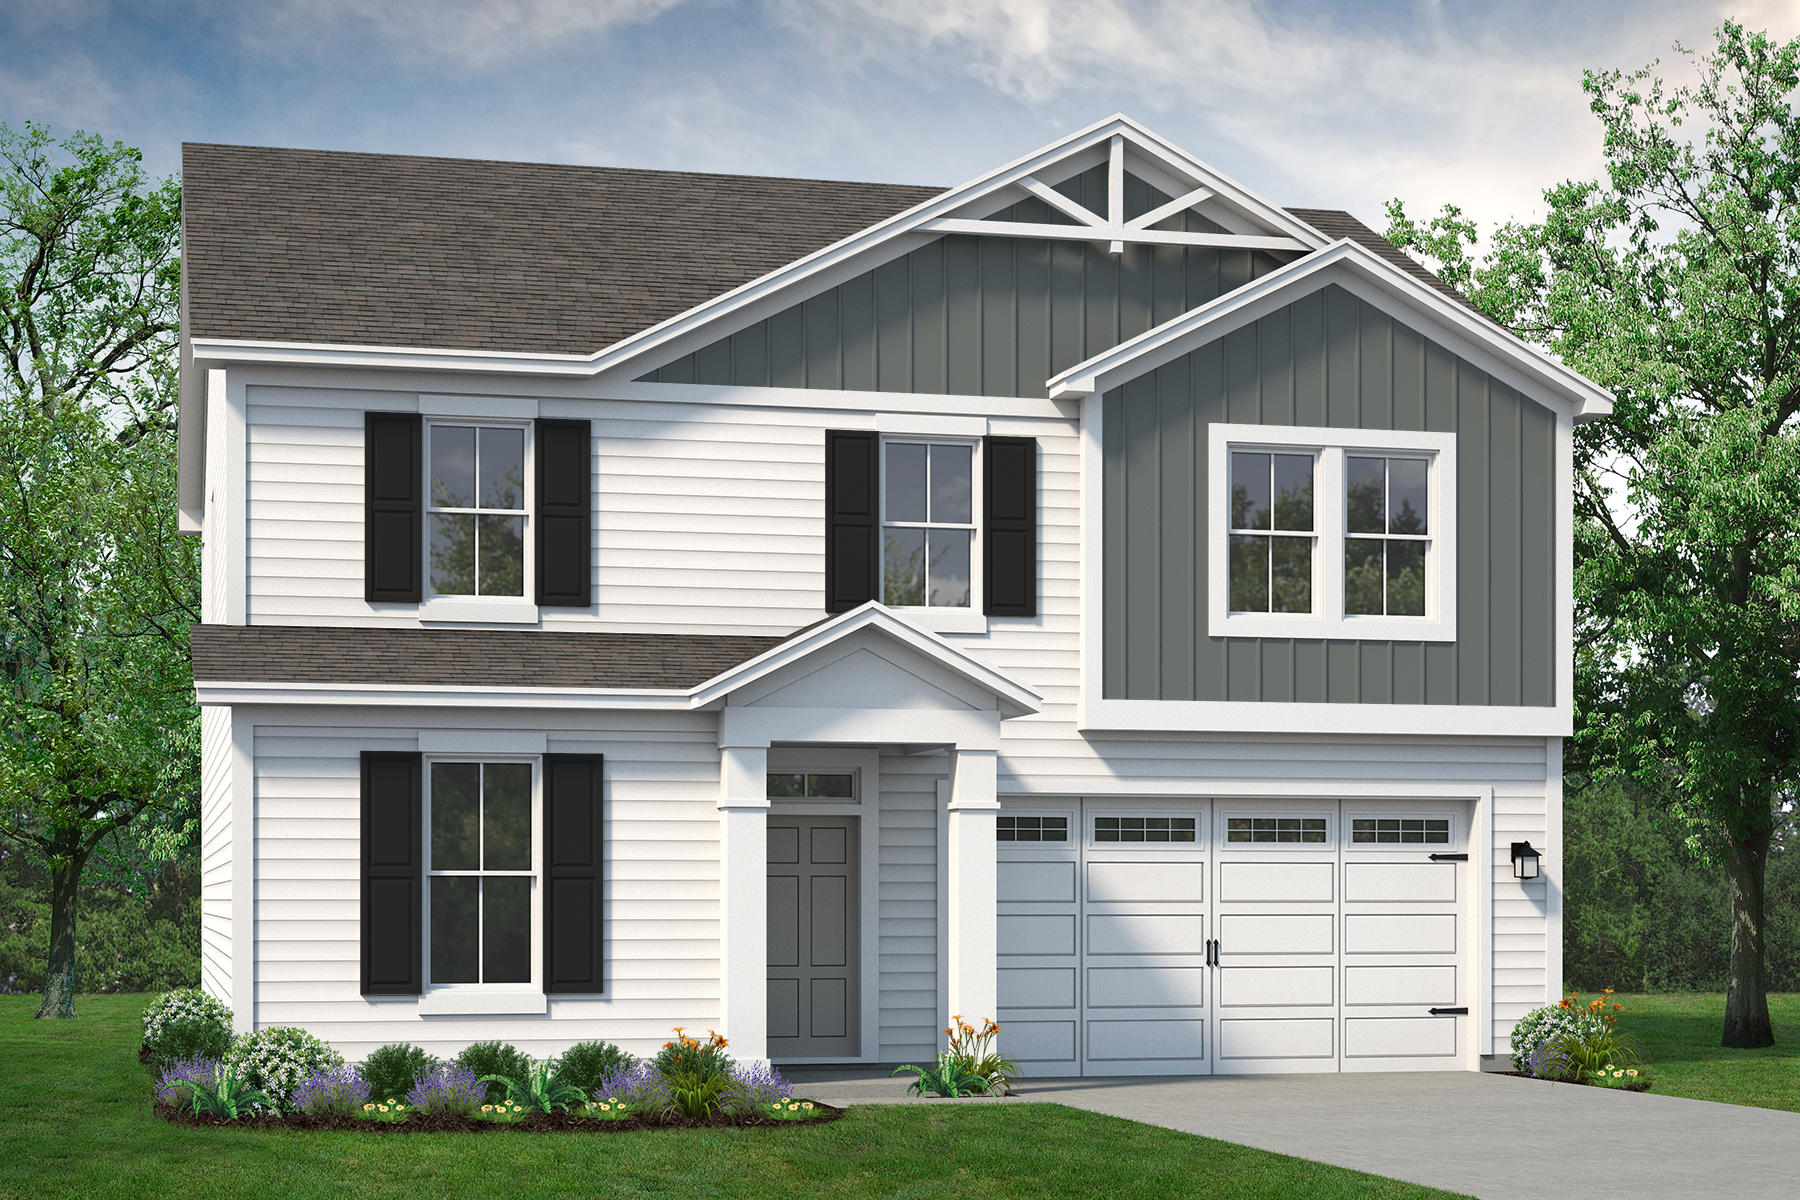 Elevation F. 5br New Home in Lillington, NC